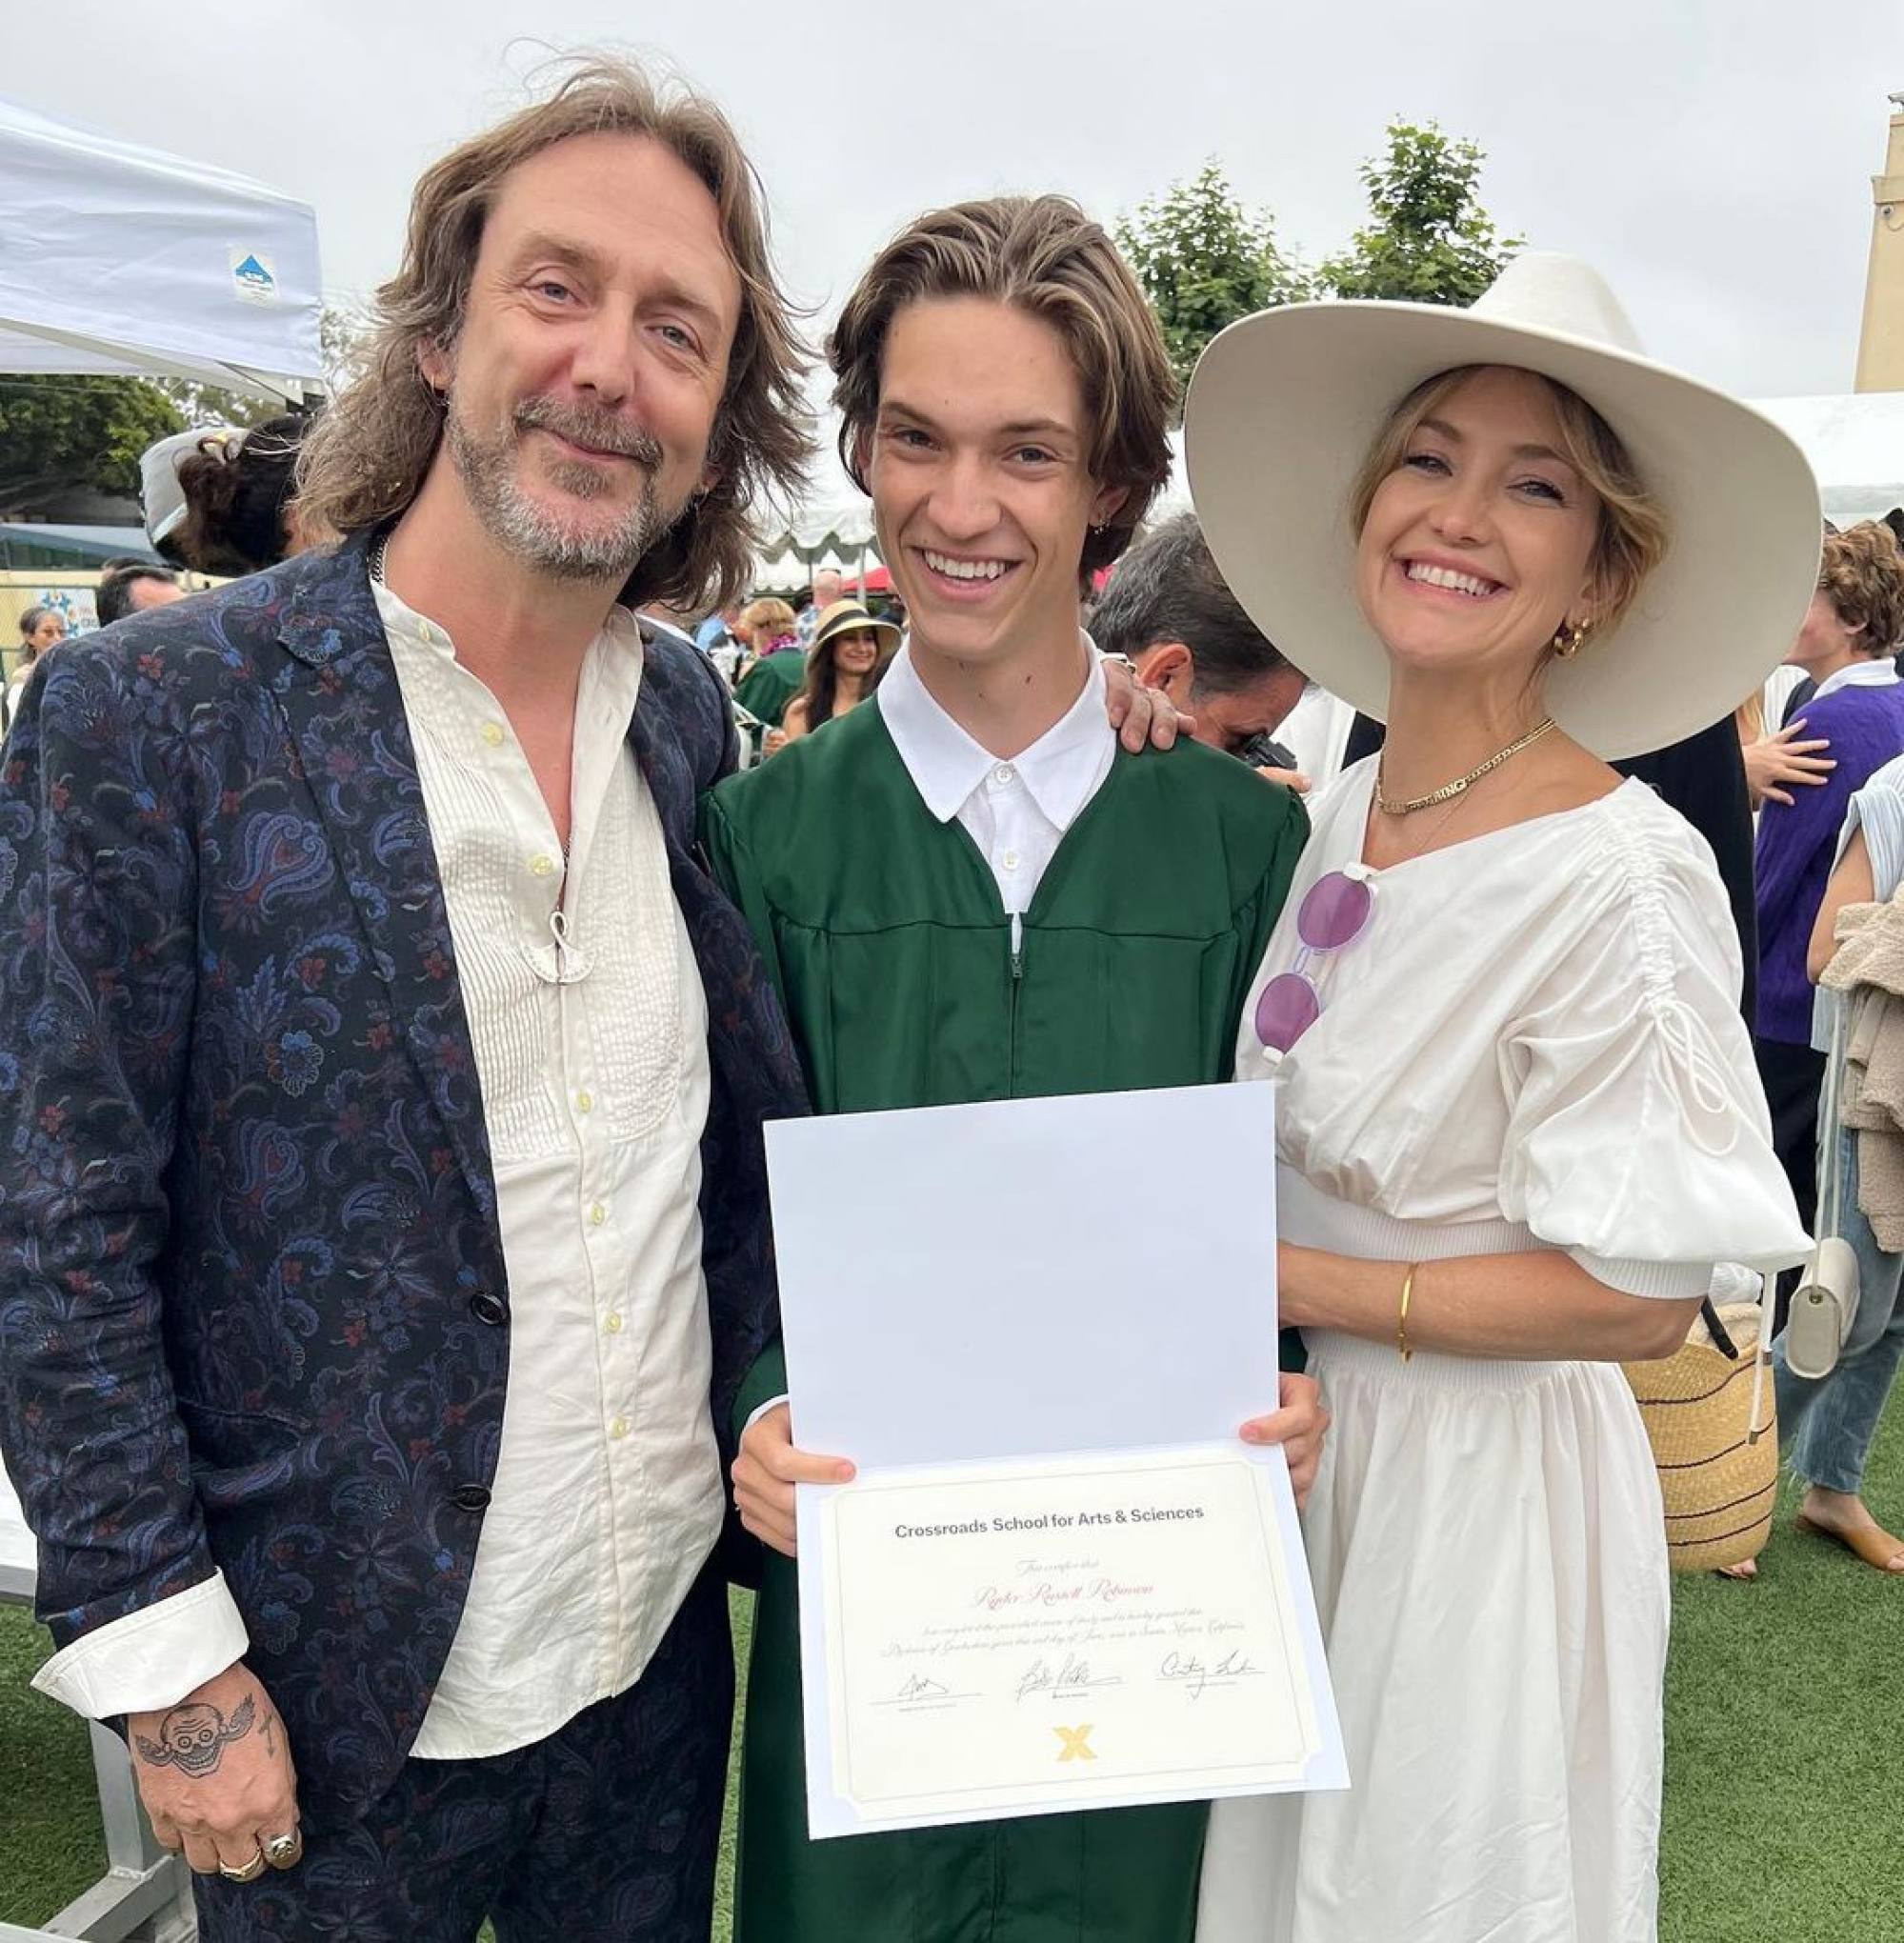 Chris Robinson and Kate Hudson son Ryder Robinson is dating Iris Apatow